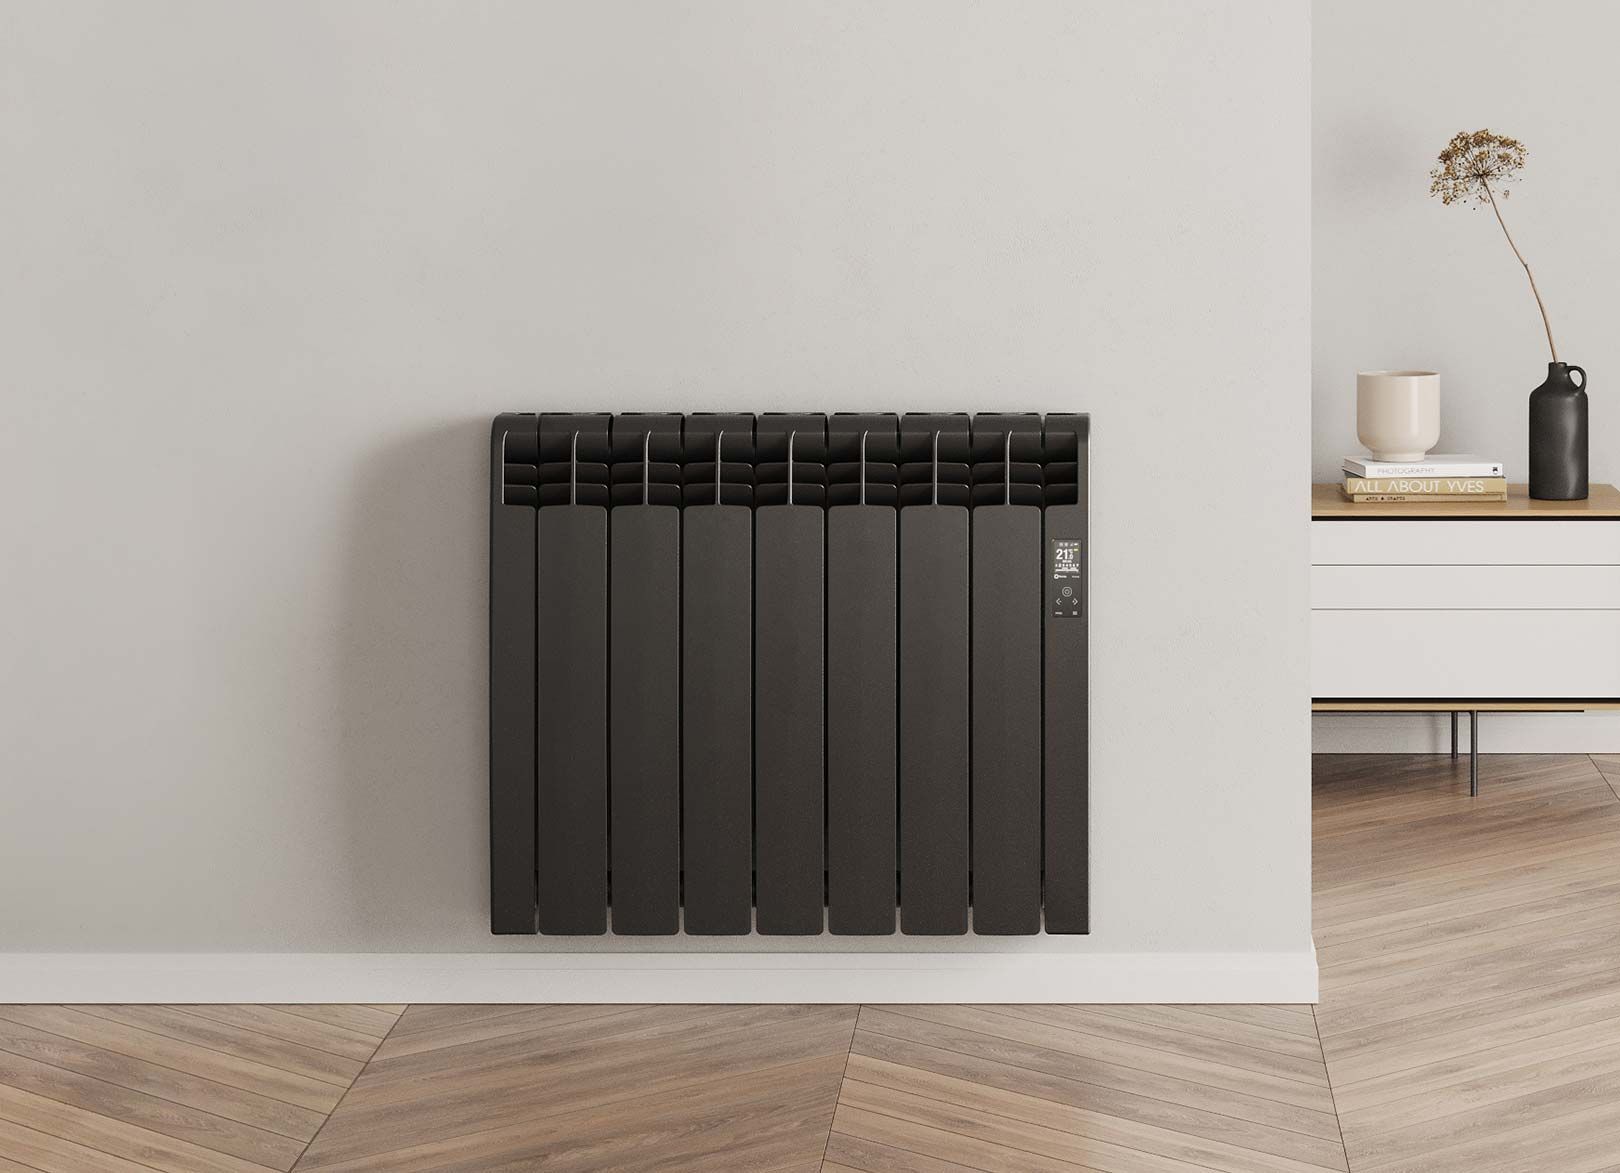 Fall in love with Rointe D Series connected heating